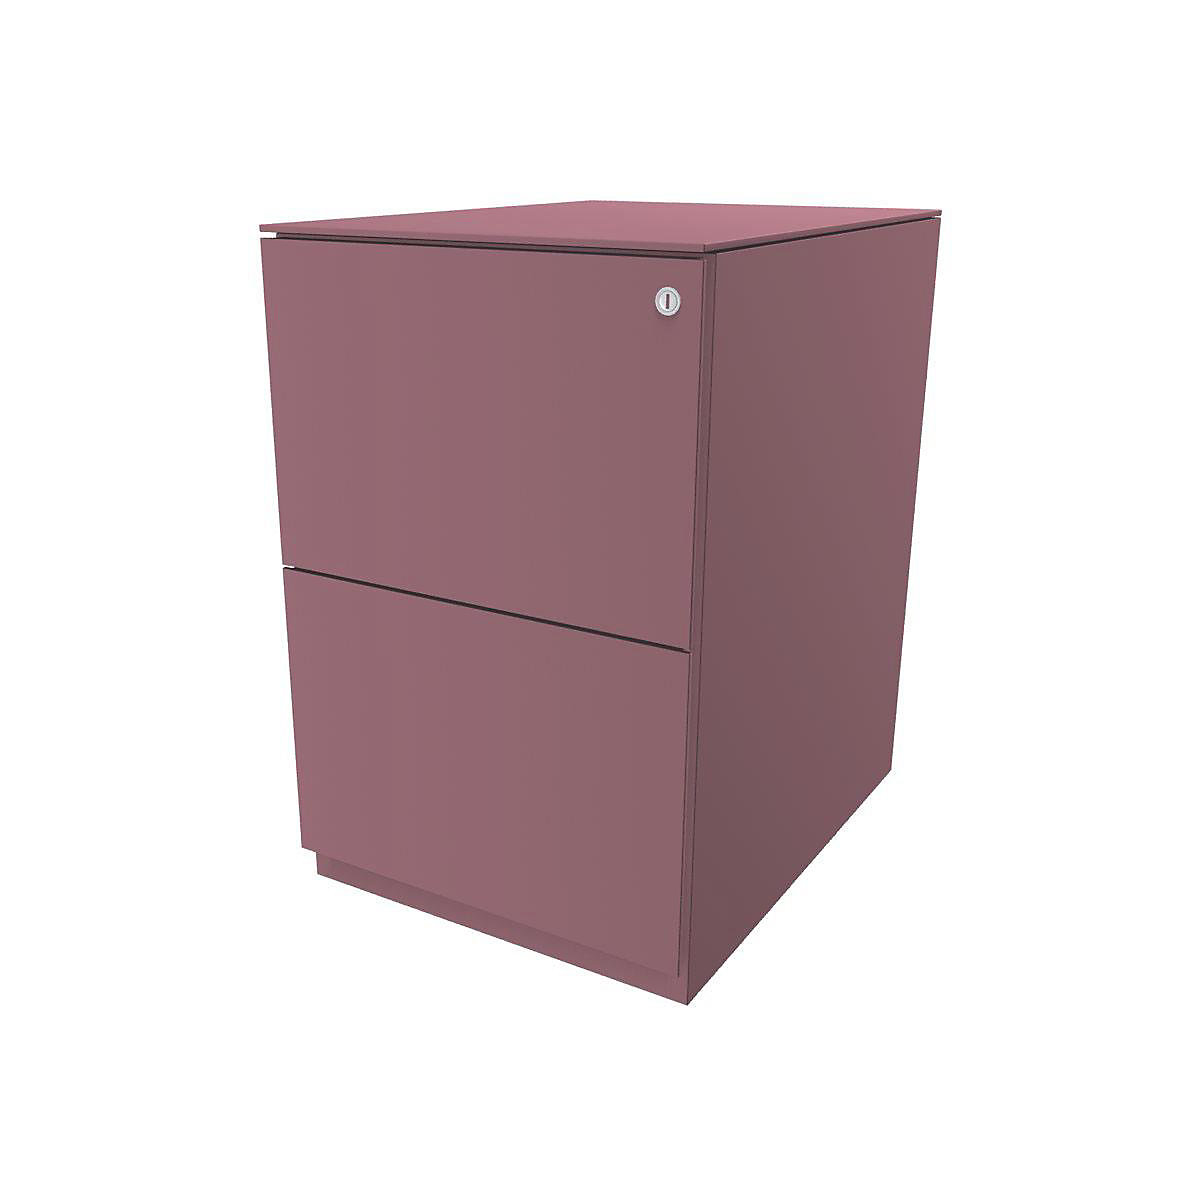 Note™ mobile pedestal, with 2 suspension file drawers - BISLEY